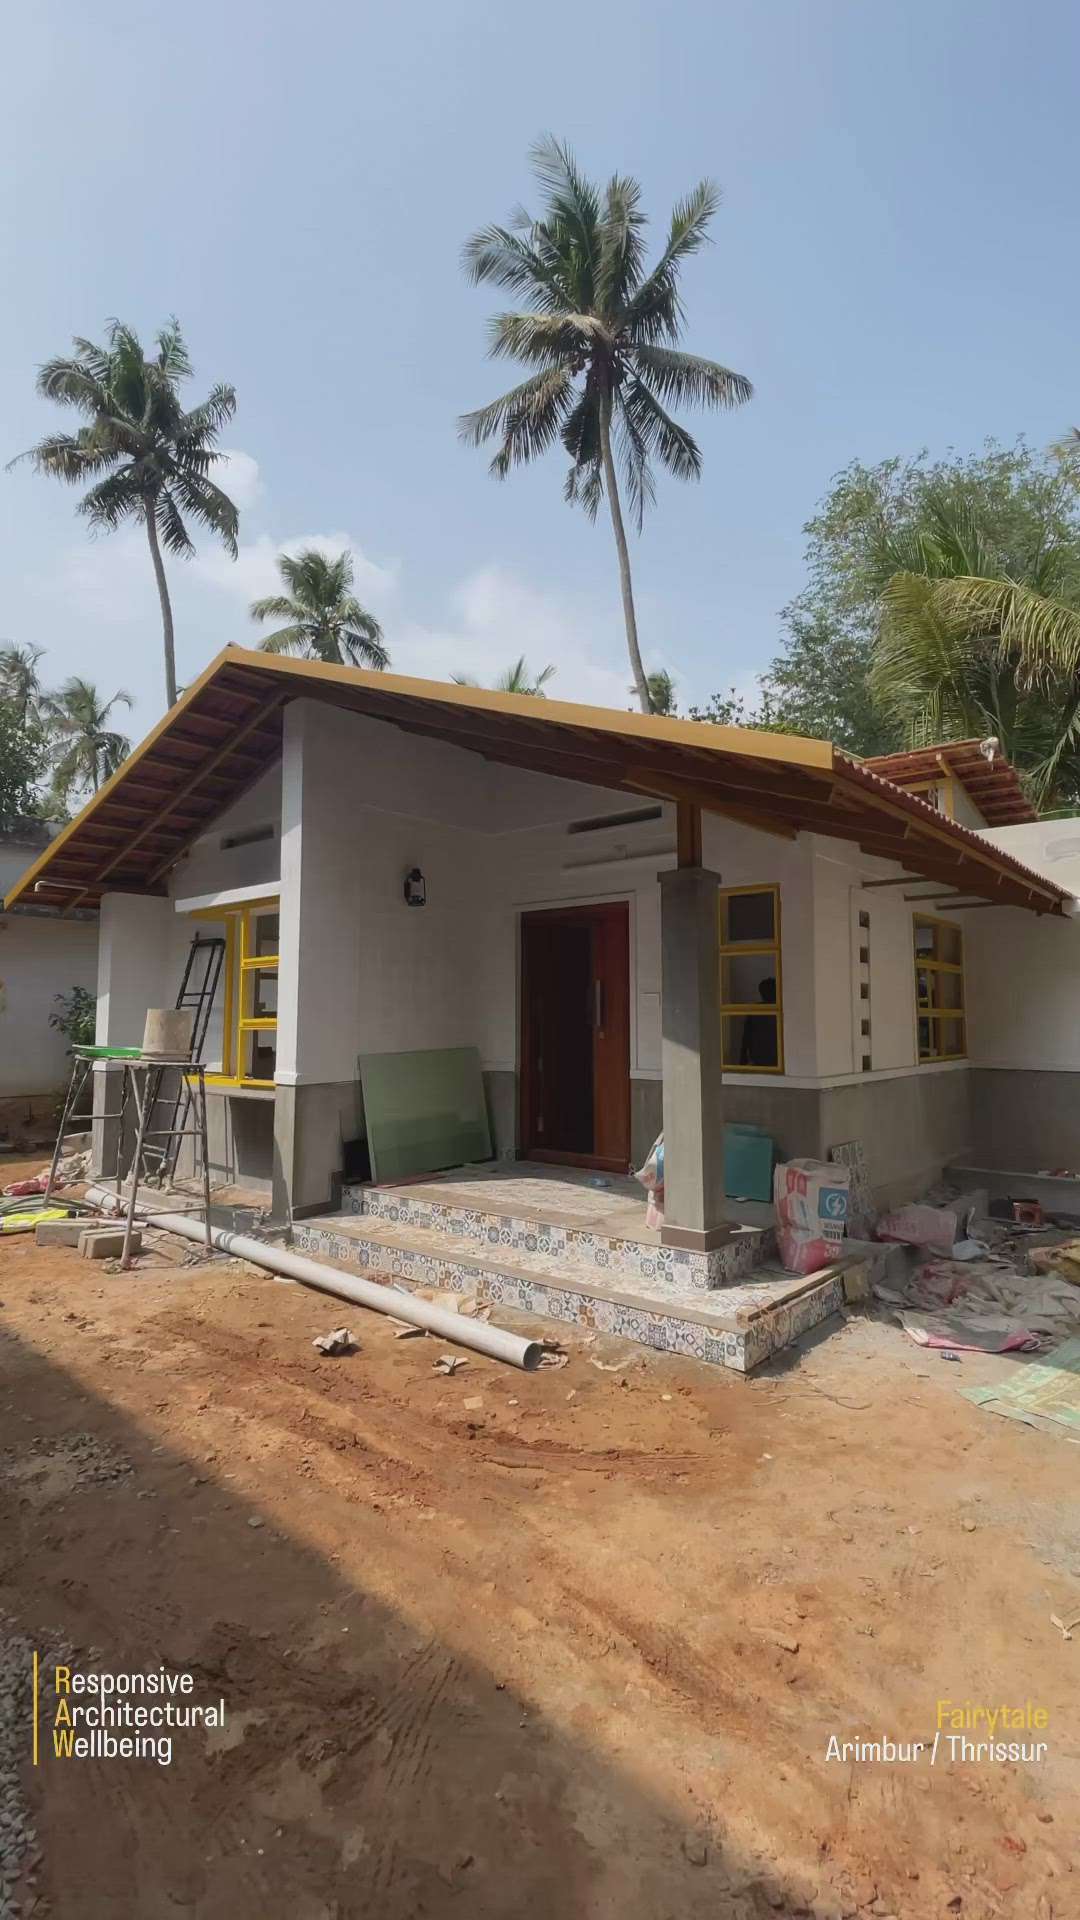 Fairy_Tale
Budget Residential Project
8 L - 800 sq.ft
Arimbur | Thrissur 

RAW - Responsive Architectural Wellbeing #raw_architecture